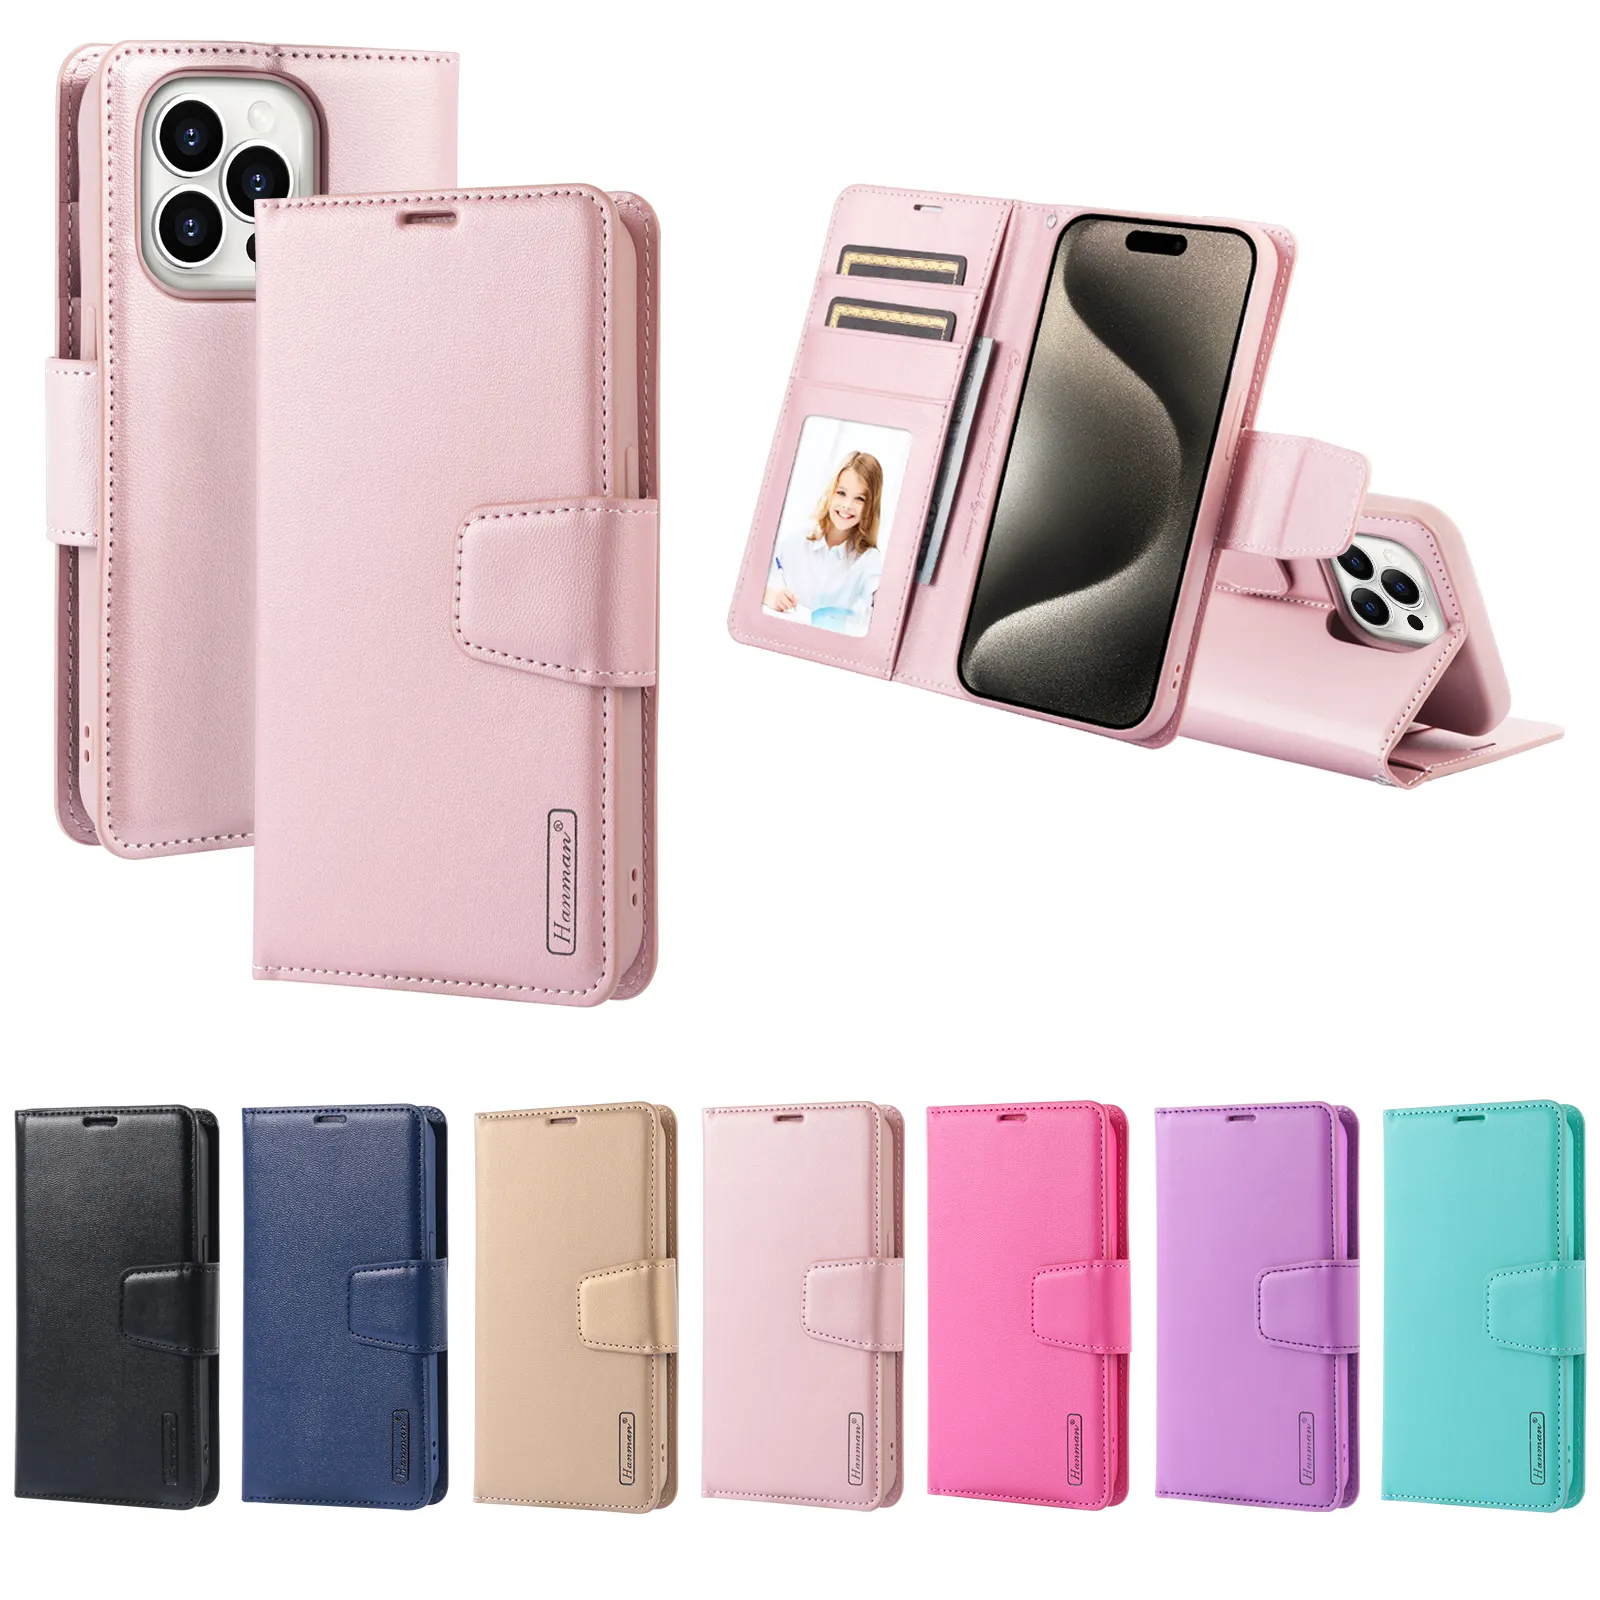 Hanman for iPhone i15pro max Luxury Card Holder Wallet Cover iphone15 PU leather wallet phone case